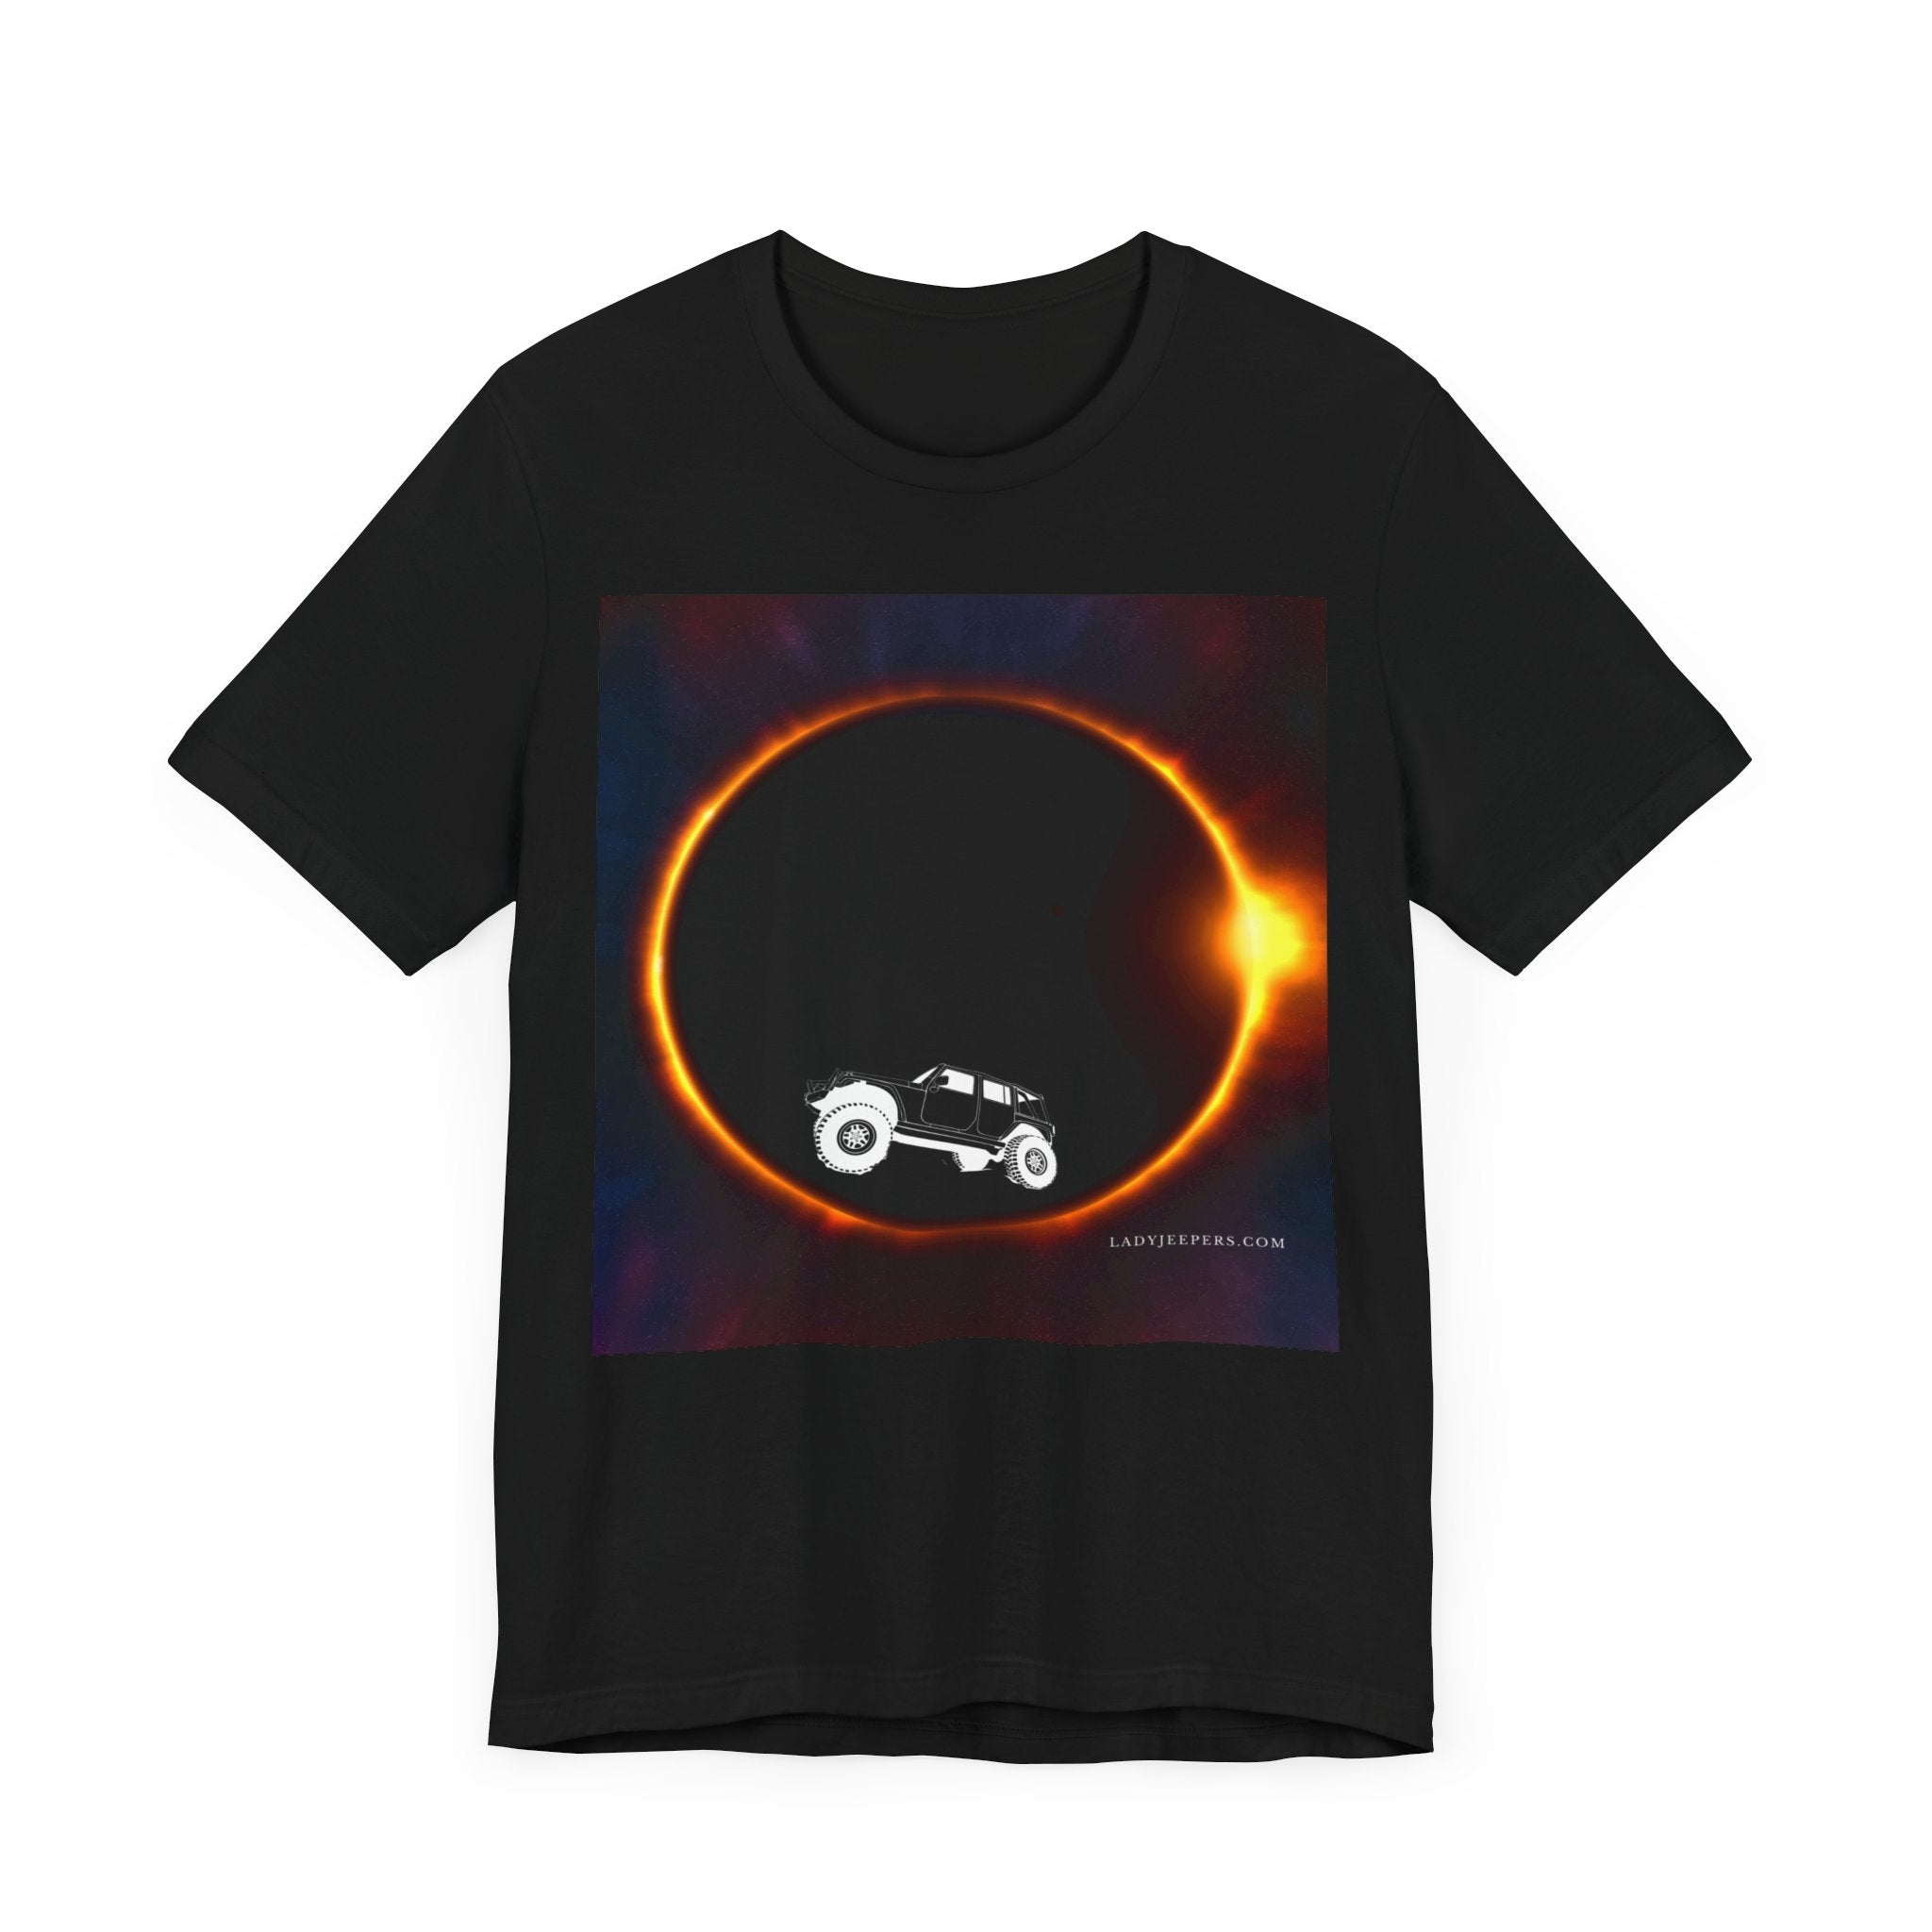 Total Eclipse of my heart T-shirt